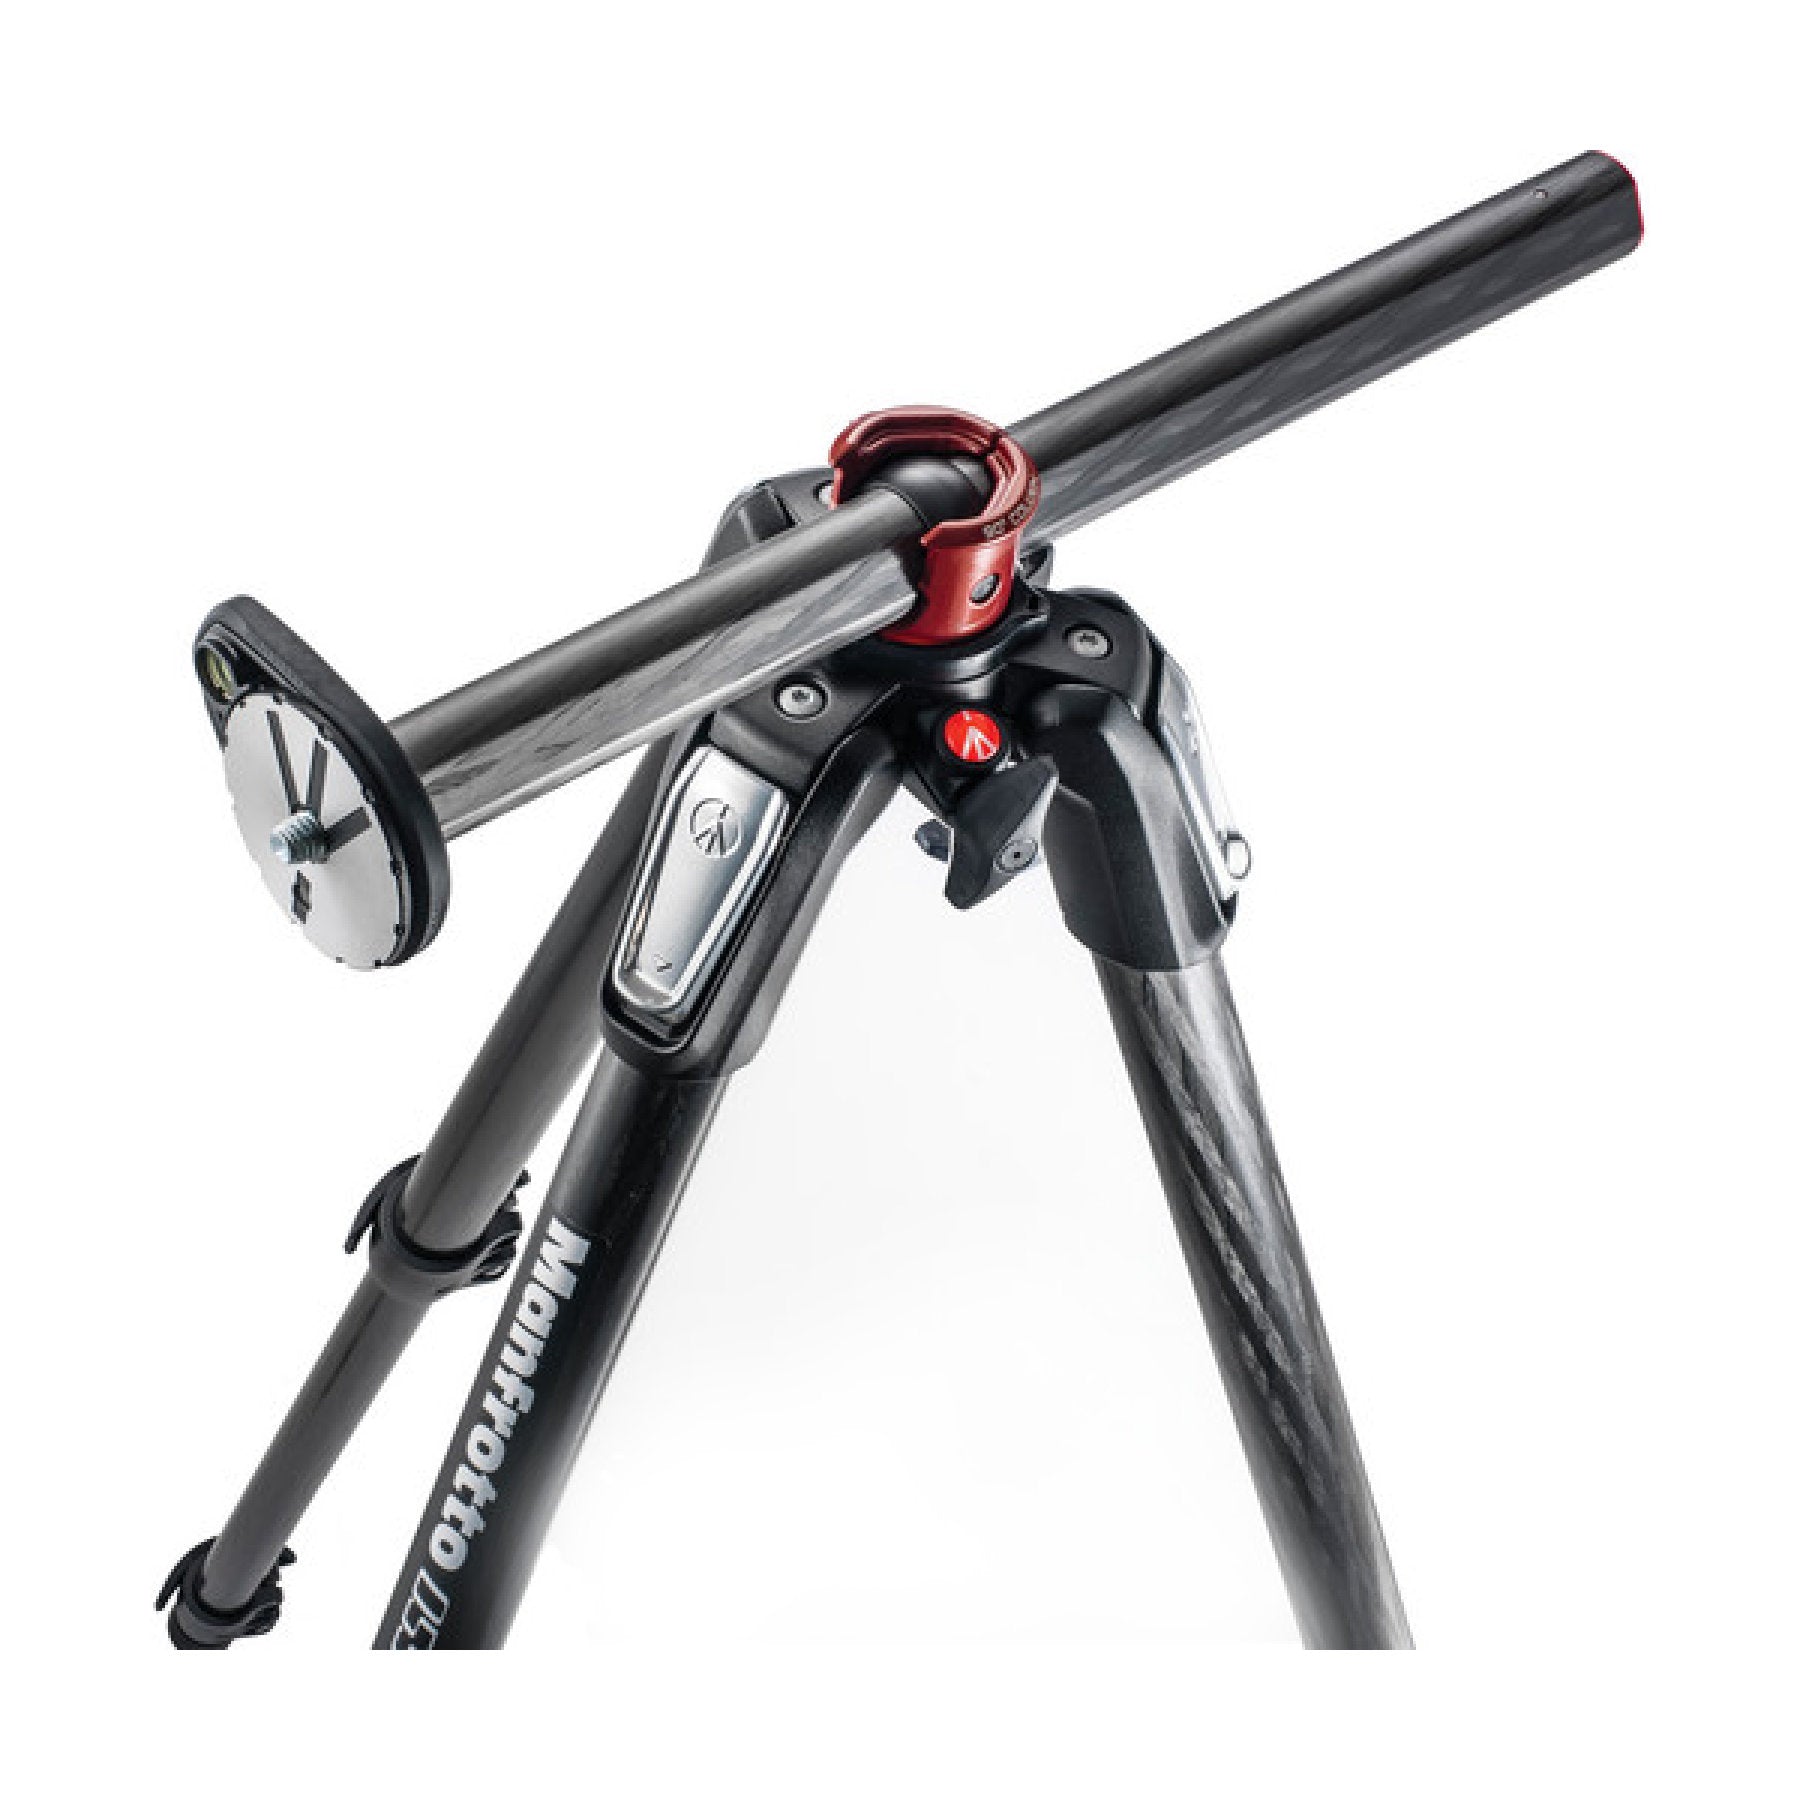 Buy Manfrotto 055 Carbon Fibre Tripod 3 Section at Topic Store